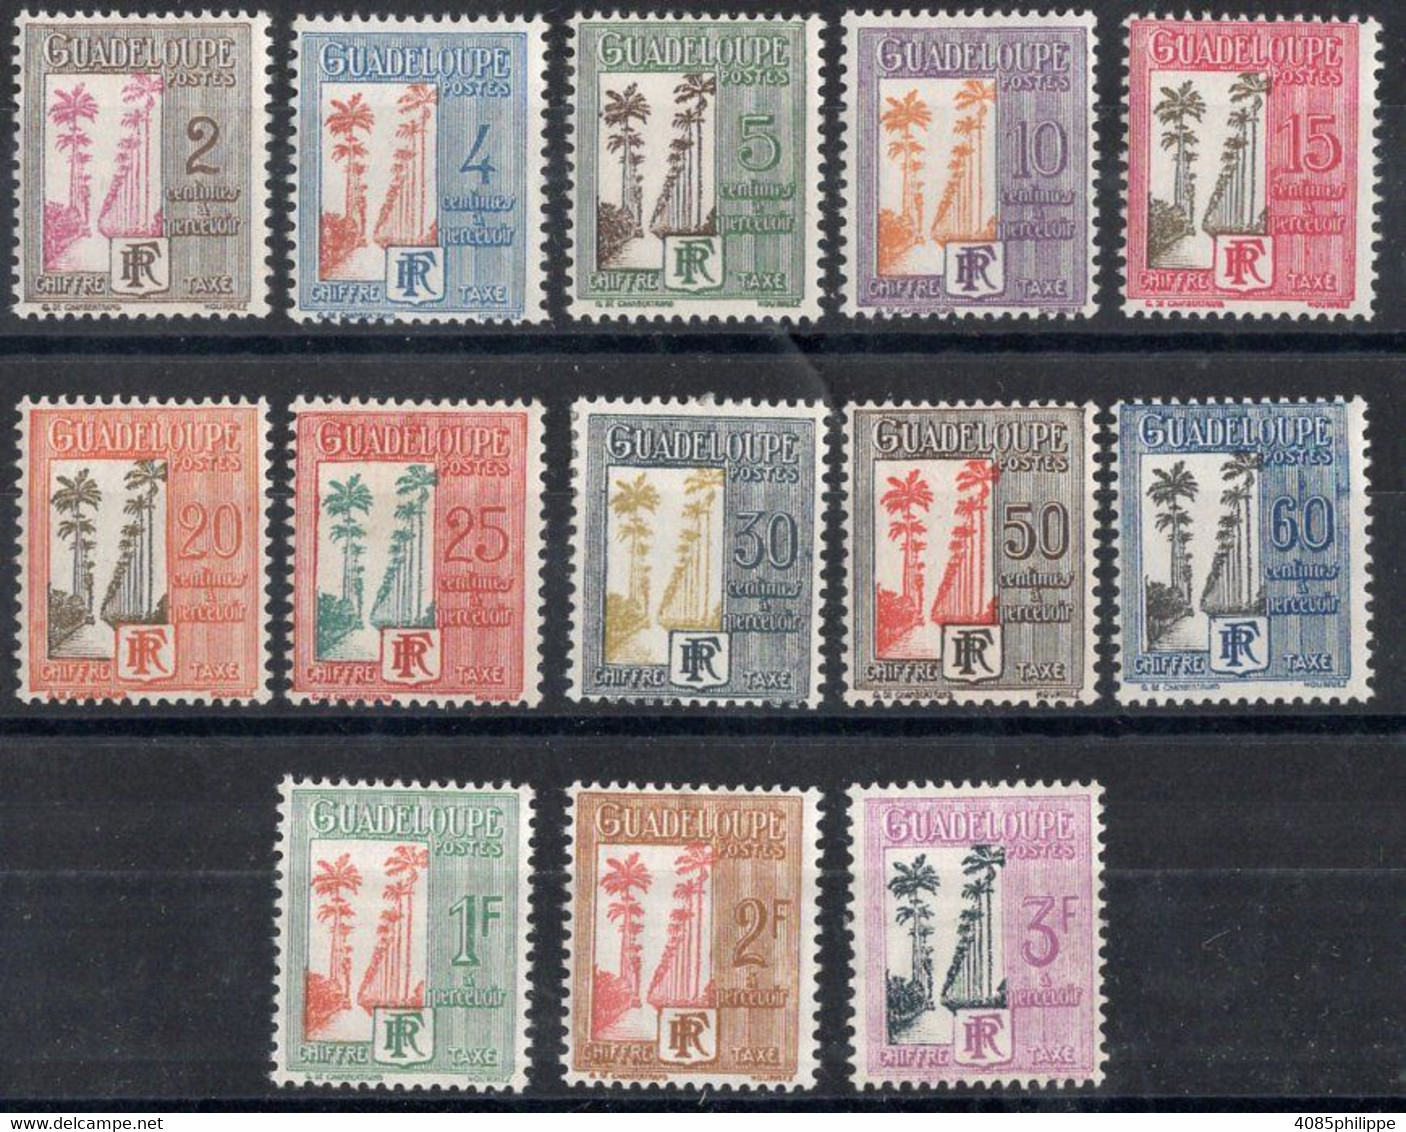 Guadeloupe Timbres-Taxe N°25* à 36* & 37(*)  Neufs Charnières TB Cote 15€00 - Postage Due